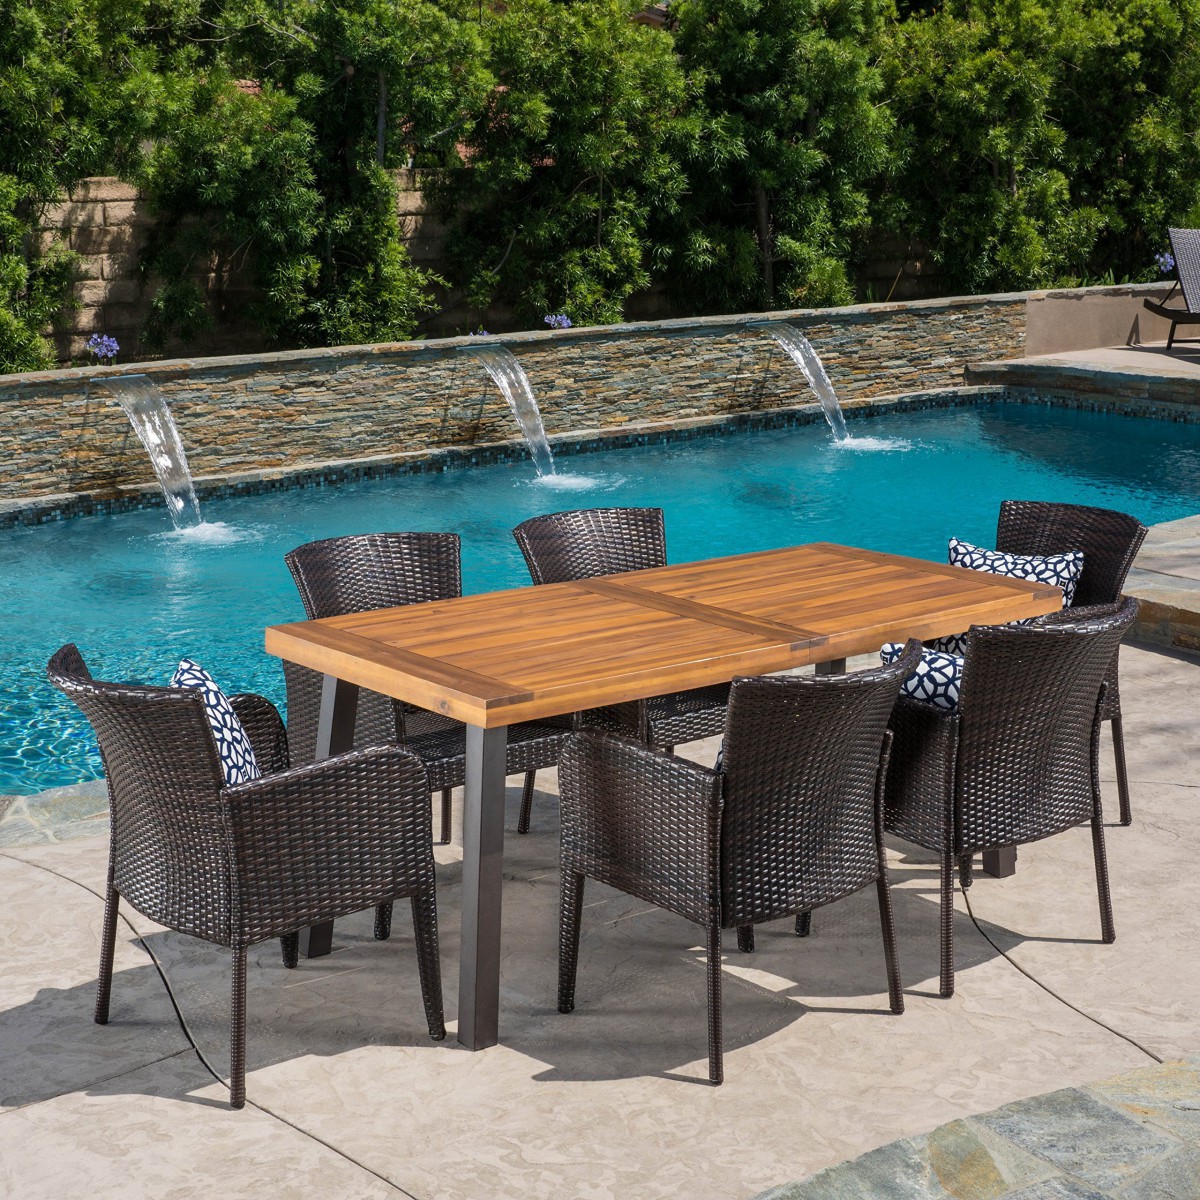 Delgado 7 Piece Outdoor Dining Set with Wood Table and Wicker Chairs